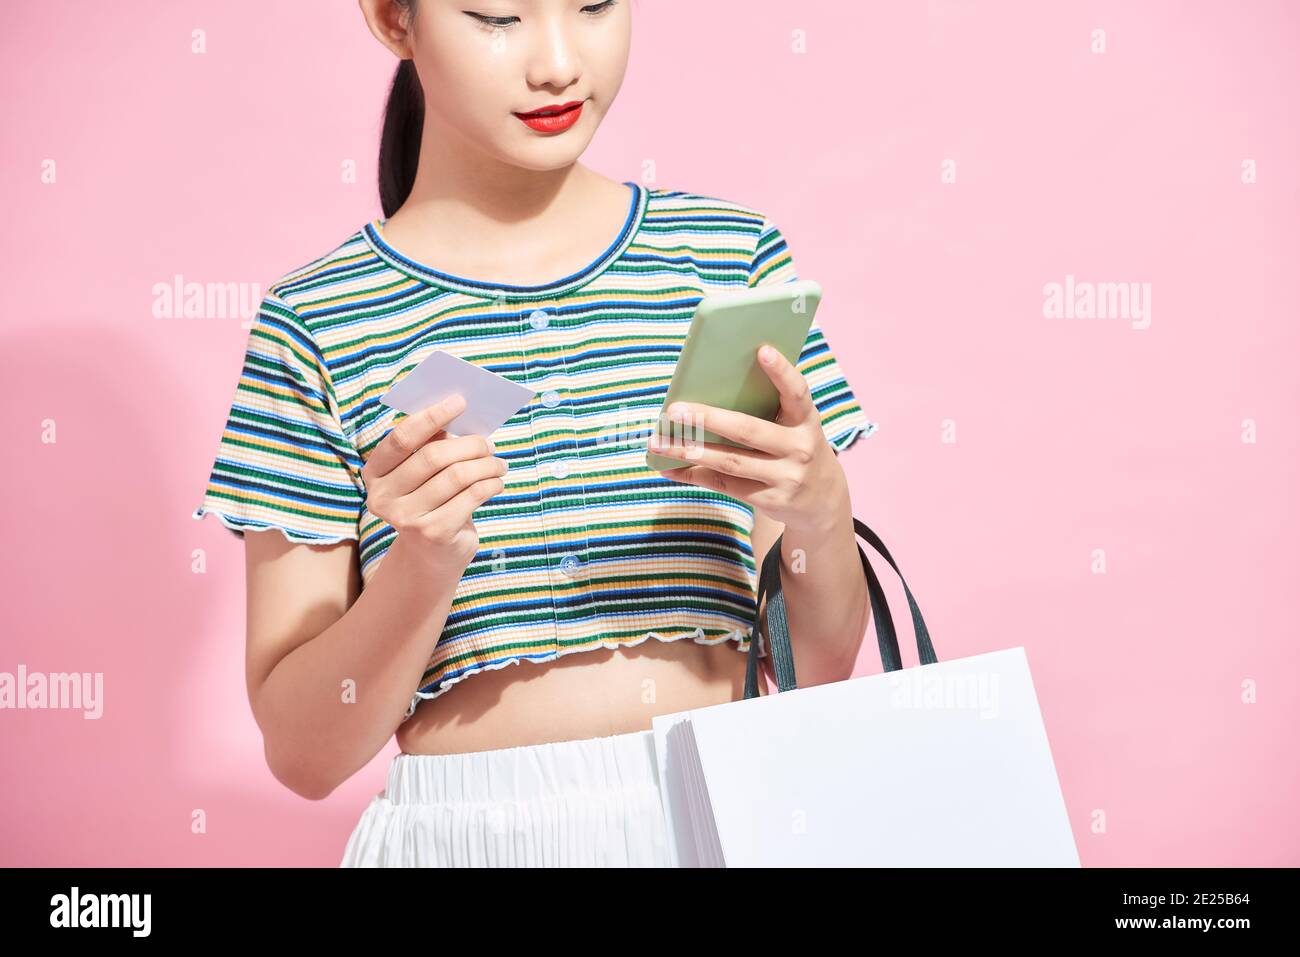 Young smiling beautiful Asian woman making online payment through mobile phone via credit card while carrying colorful shopping bags Stock Photo